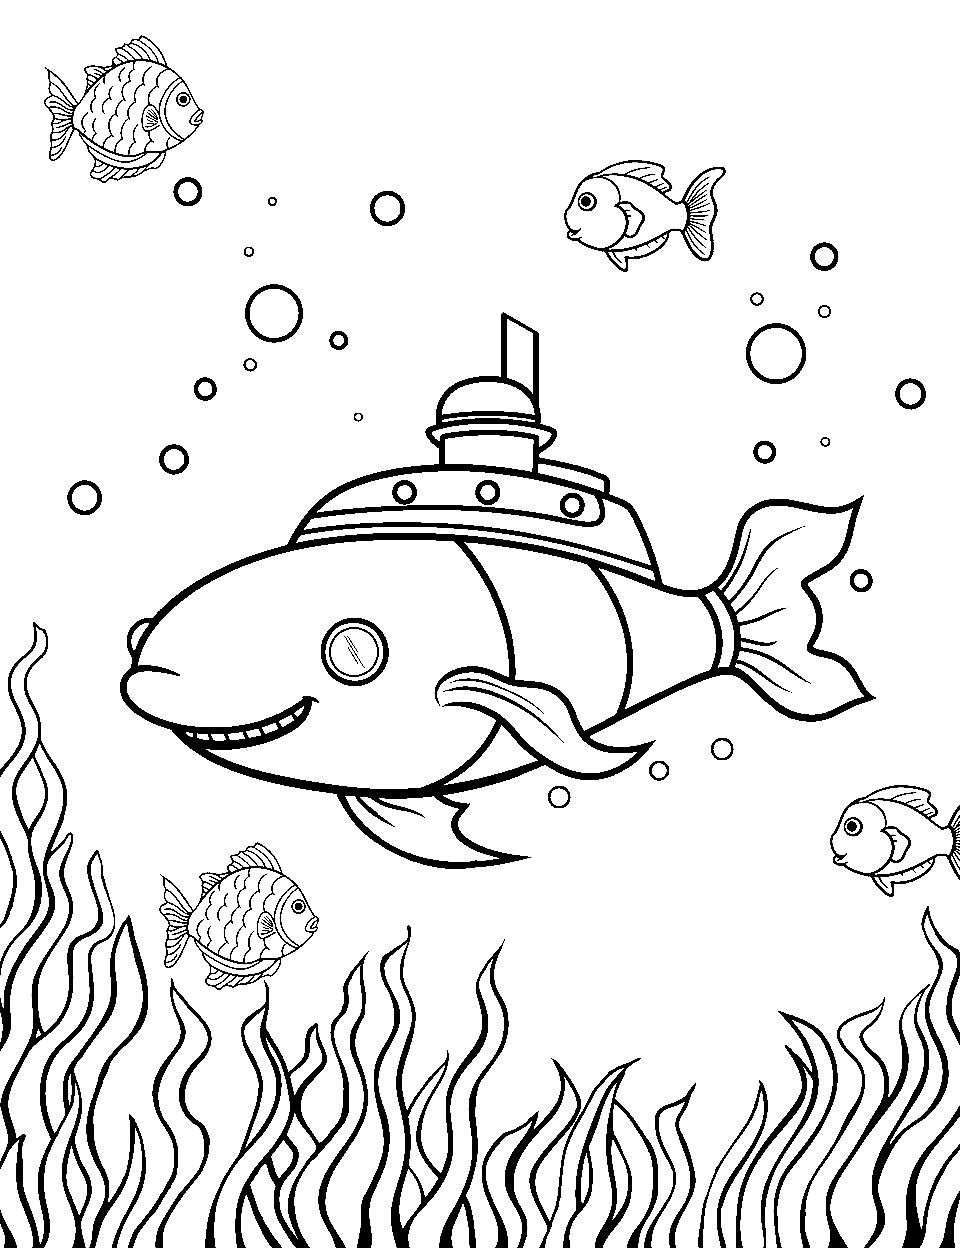 Ocean Research Submarine Coloring Page - A small research fish lookalike custom submarine exploring the ocean depths.